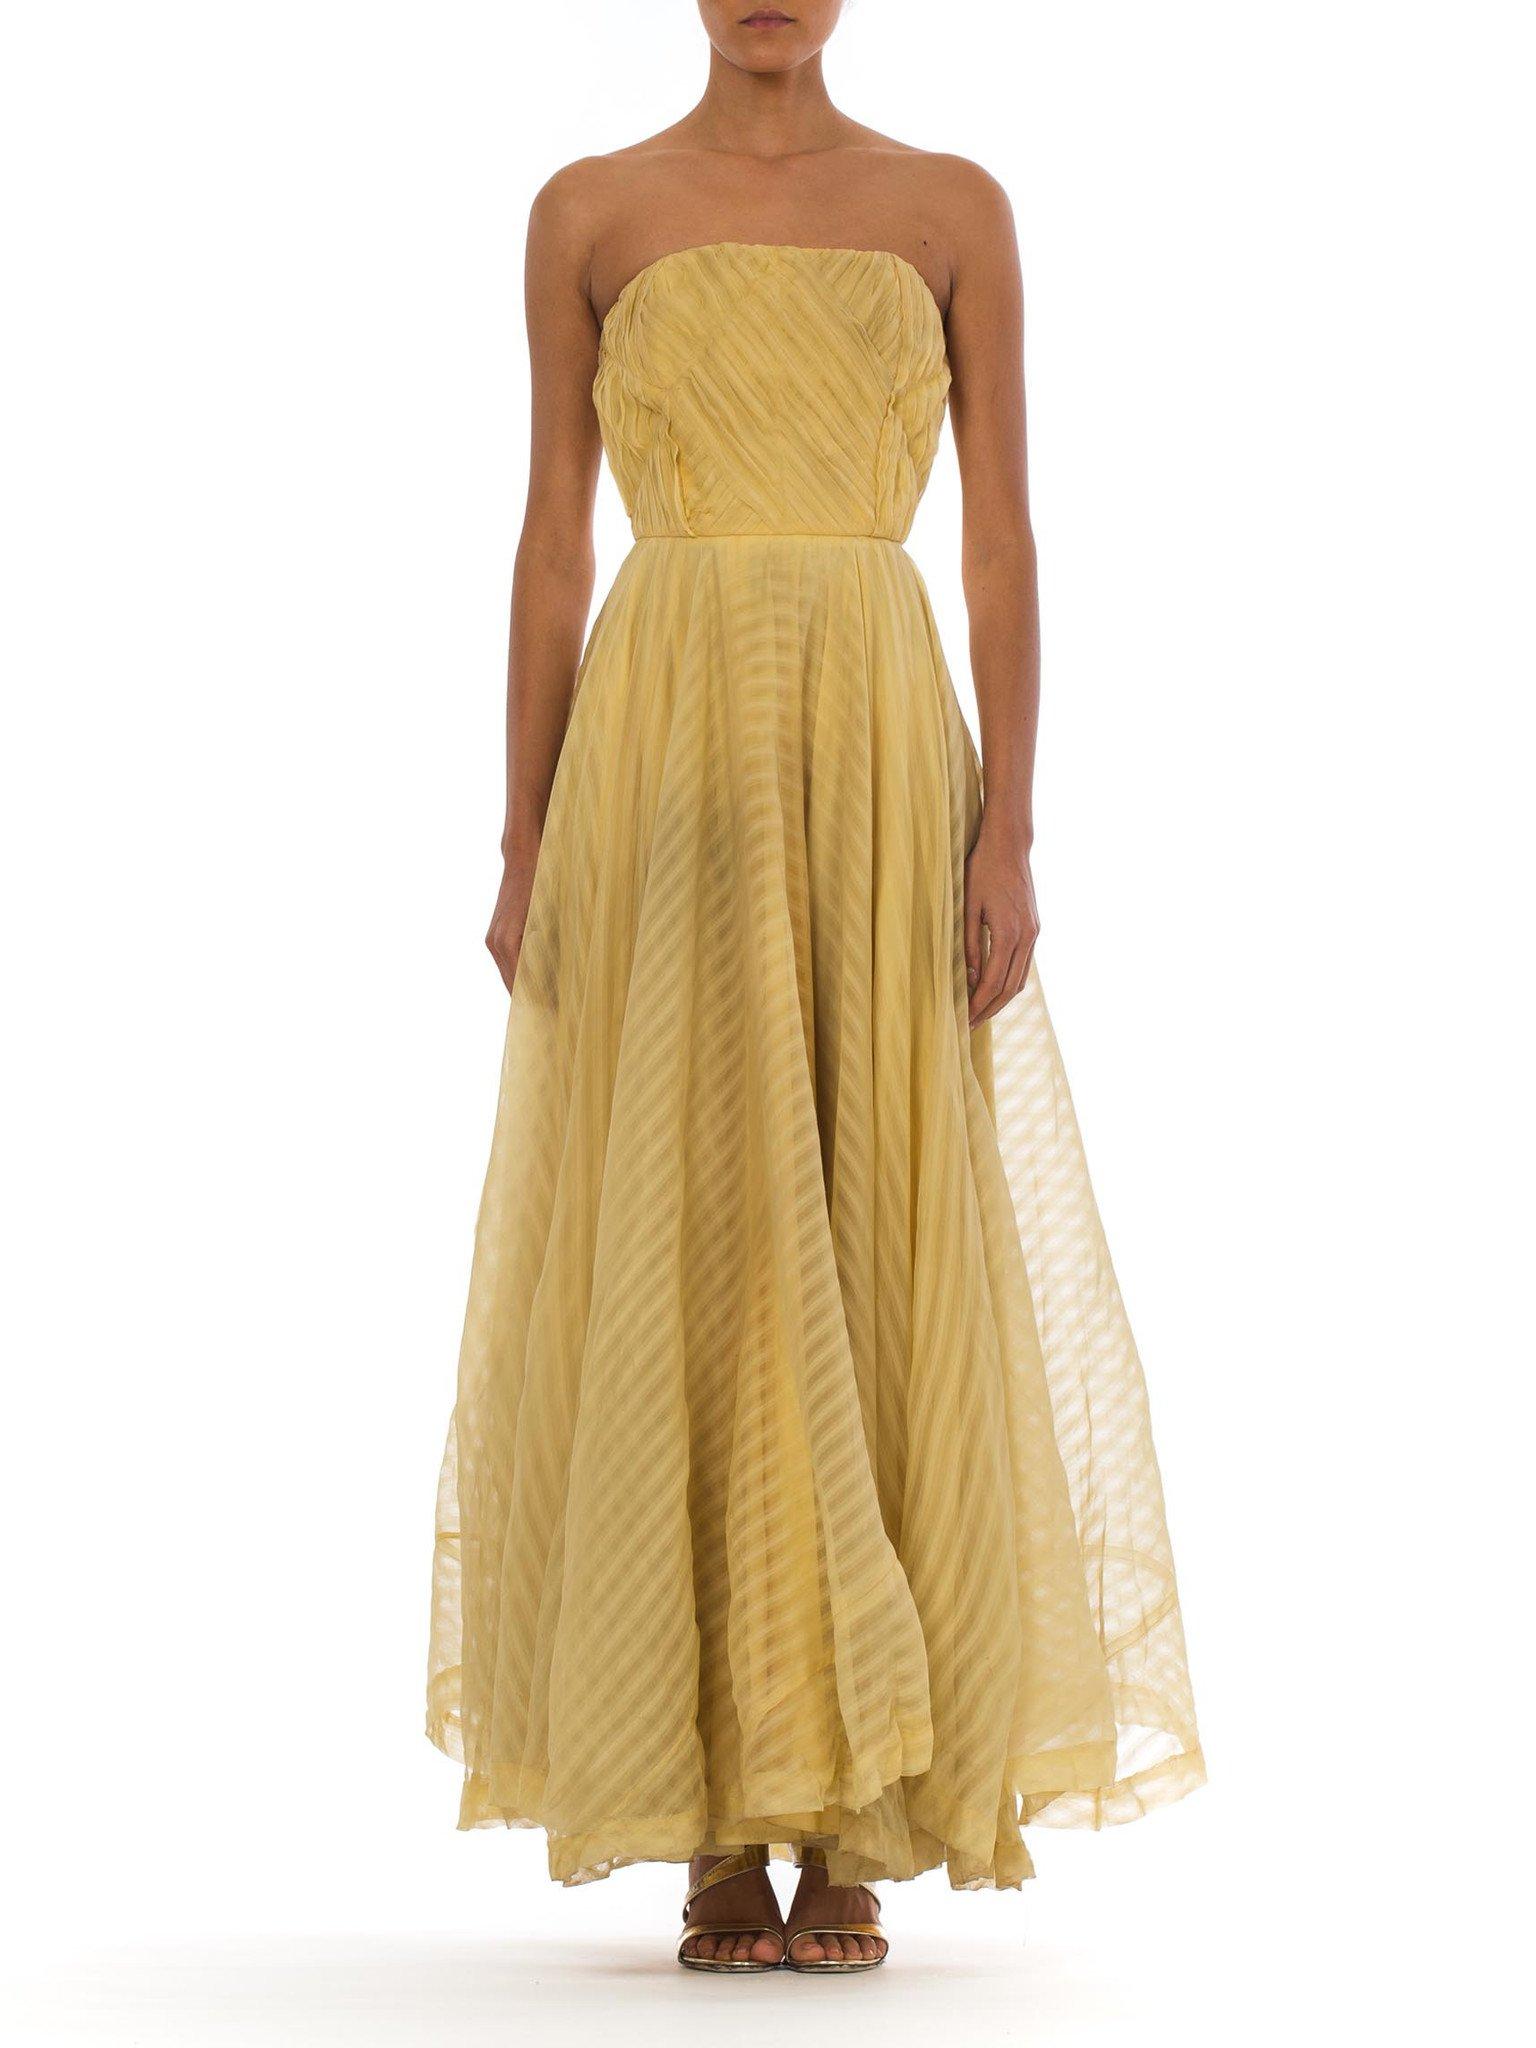 1940S Dusty Yellow Silk Chiffon Stripe Strapless Gown With Massive Ballgown Skirt For Dancing